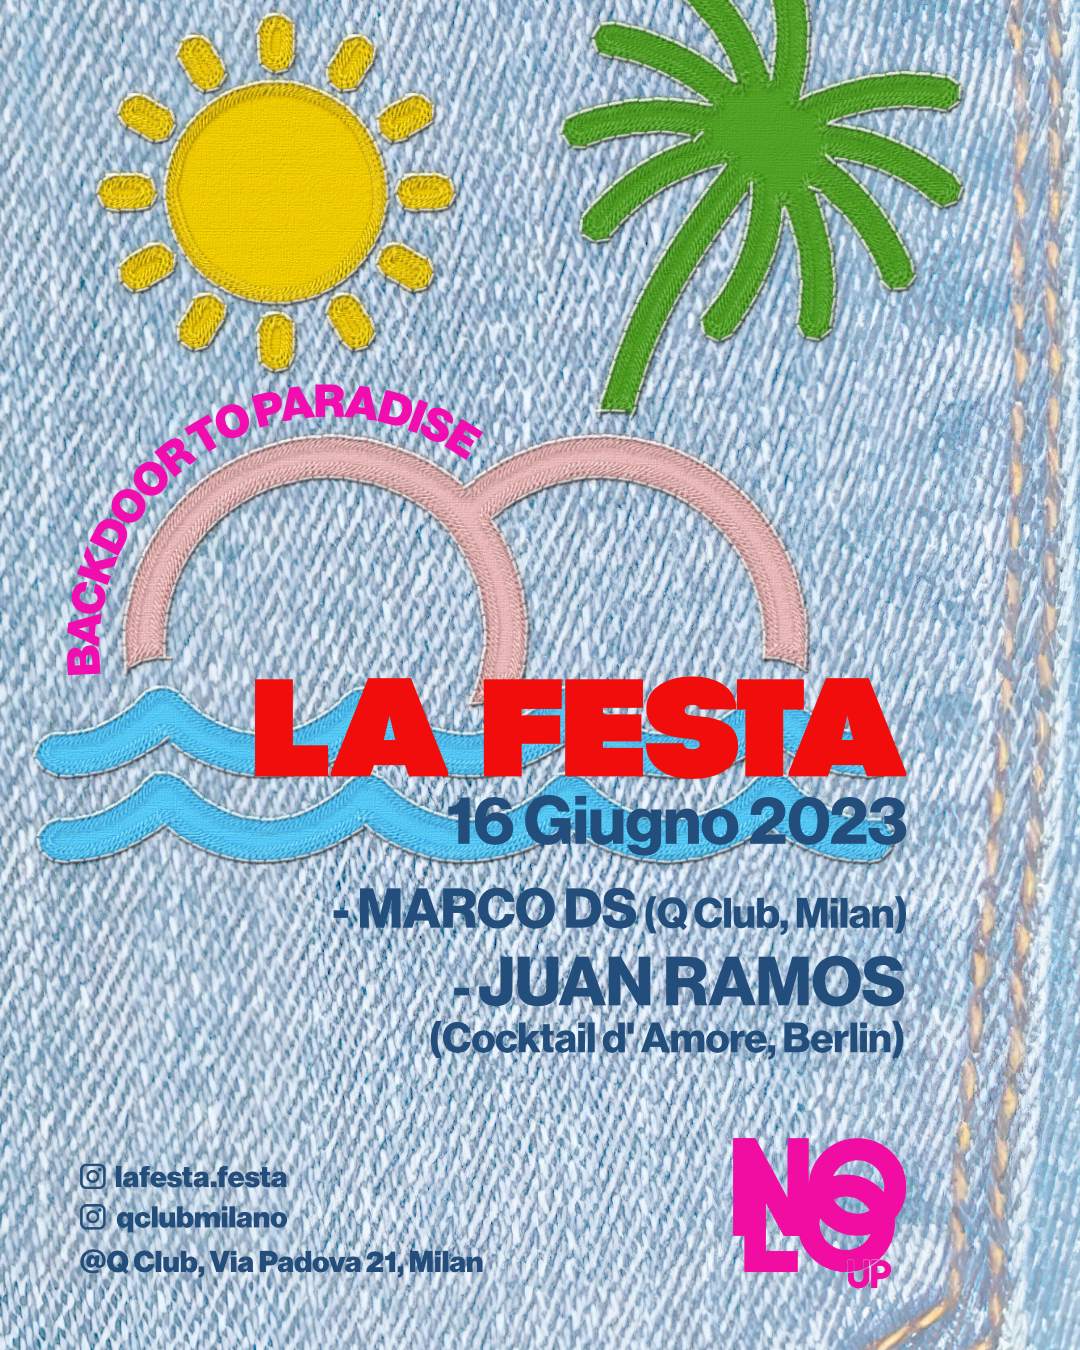 LA FESTA & NoloUP, BACKDOOR TO PARADISE with Juan Ramos (Cocktail d'Amore, Berlin) - フライヤー表